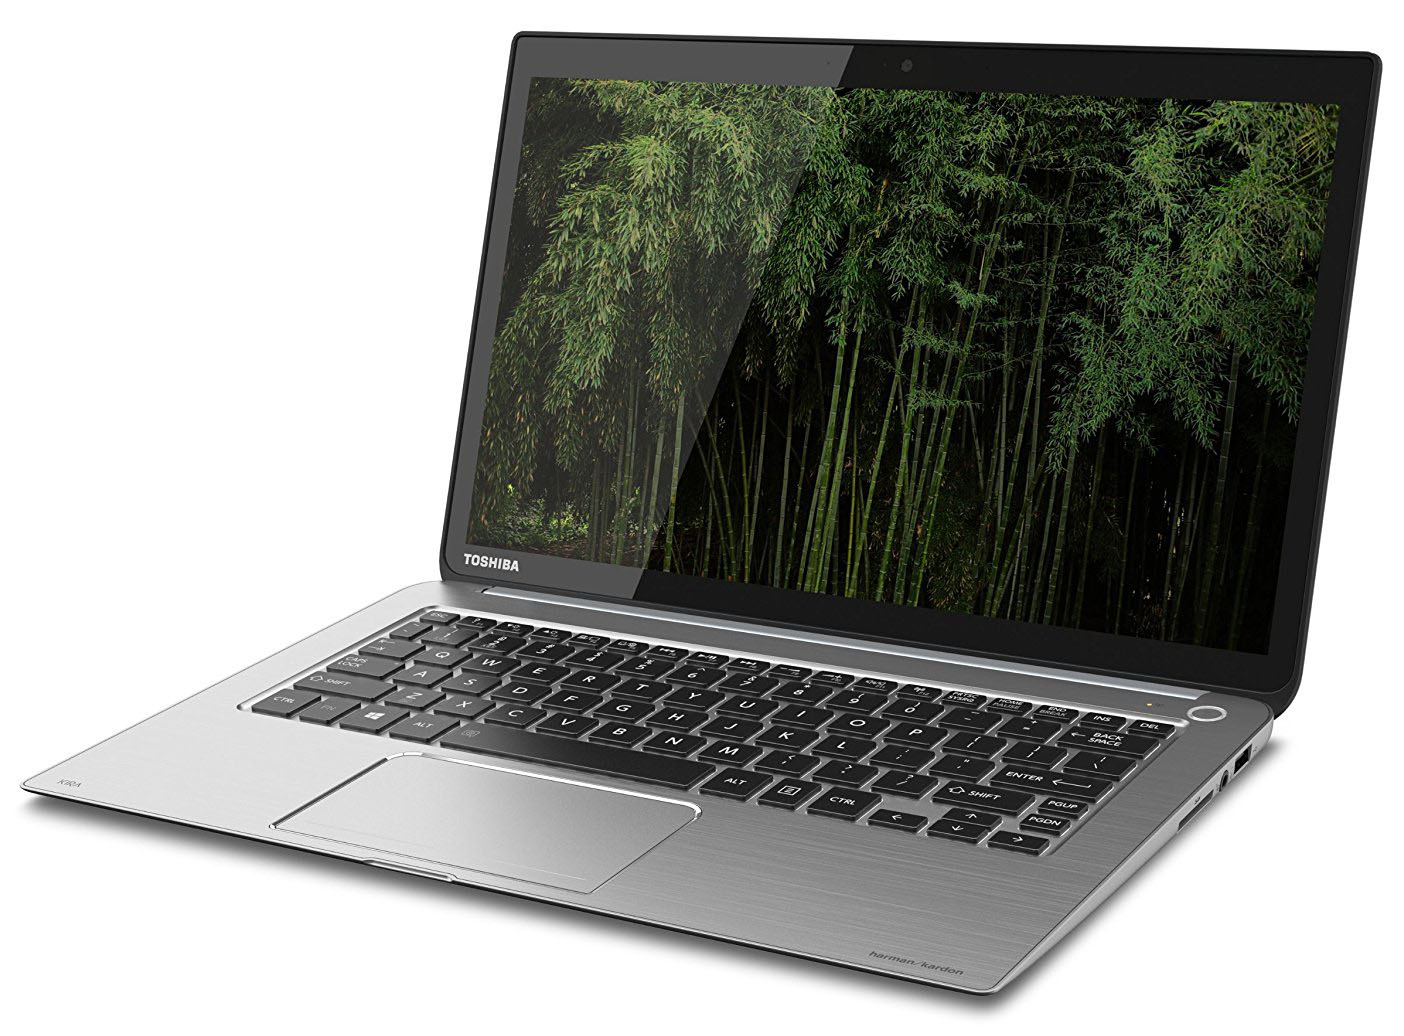 Toshiba Ultrabook to debut at Best Buy for $799 - CNET